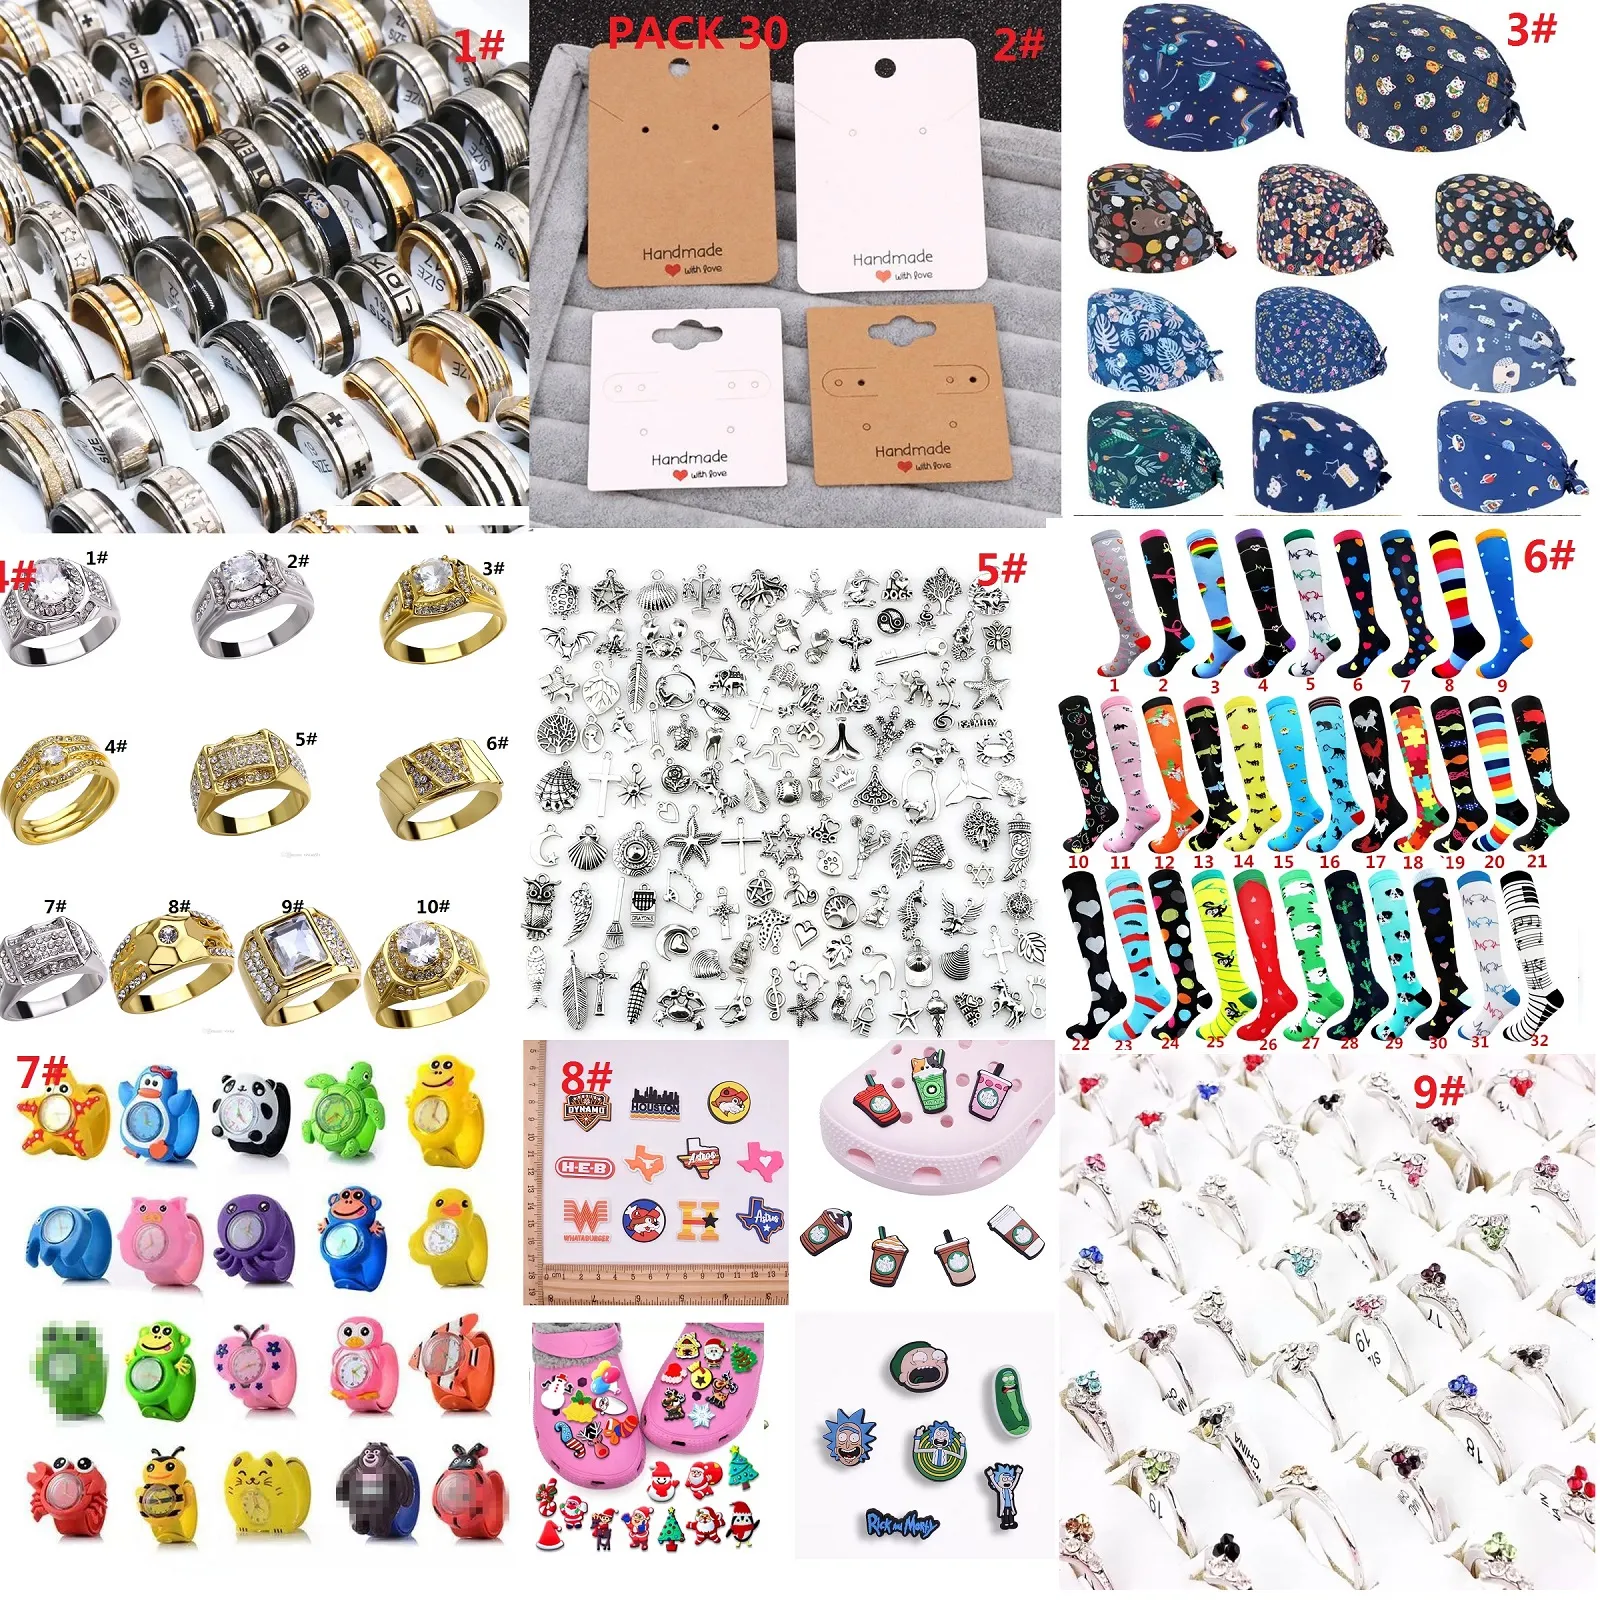 5x5cm 5x7cm Card Earrings and Necklaces Display Cards Cardboard Packaging Hang Tag Ear Studs Paper Card for Jewelry Nurse Hat Mini Life Pendant Compression Socks